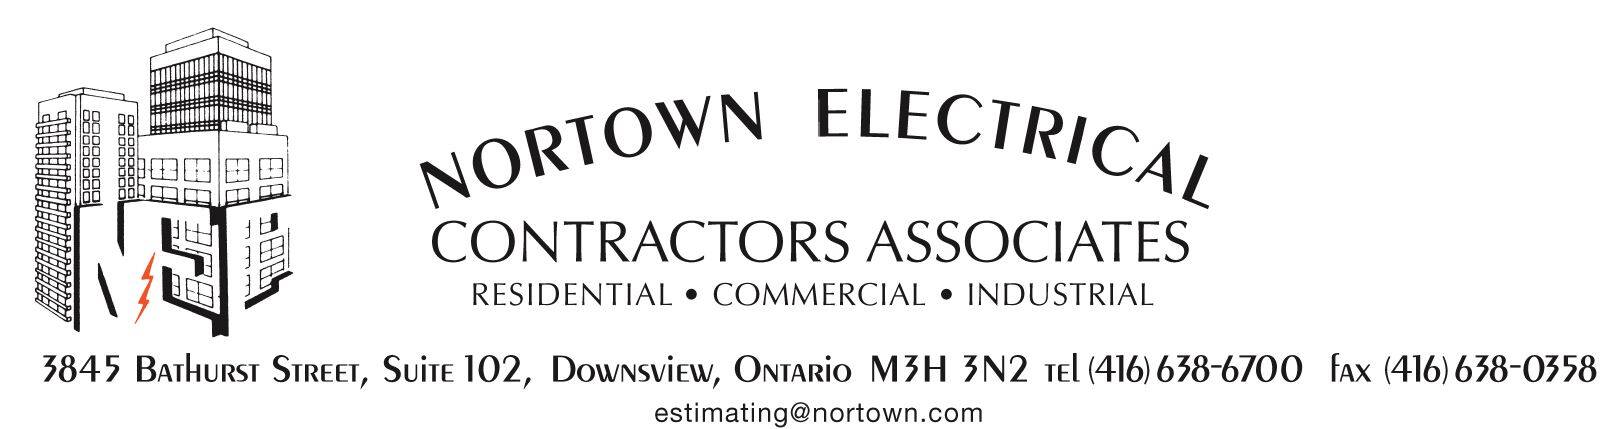 Nortown Electrical